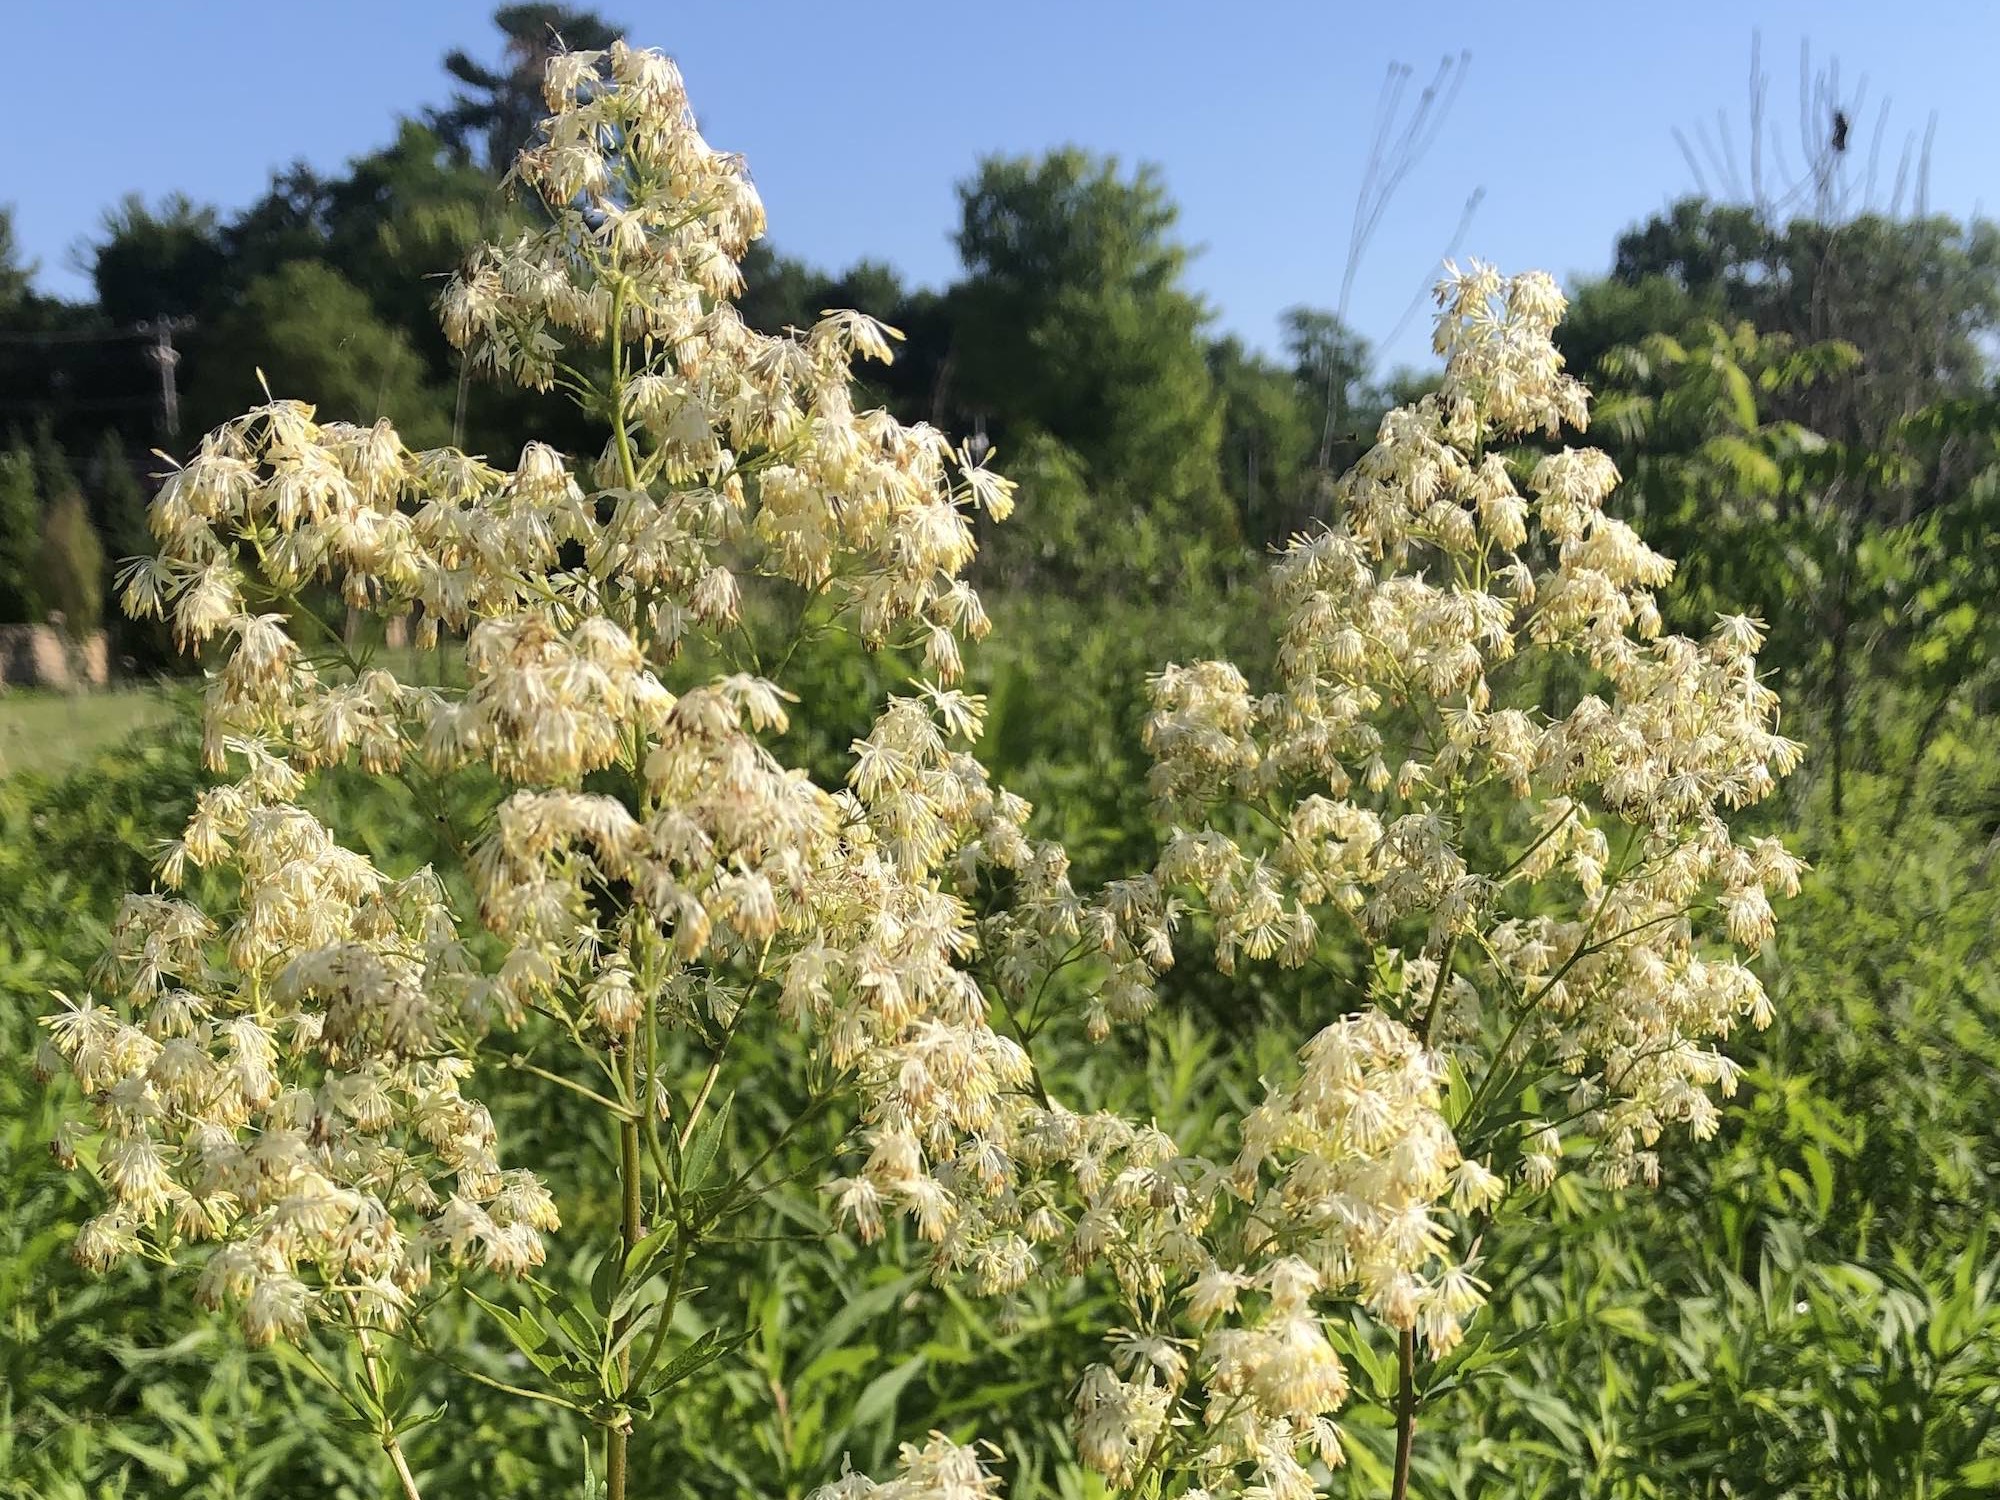 Tall Meadow-rue on shore of Retaining Pond in Madison, Wisconsin on June 16, 2020.